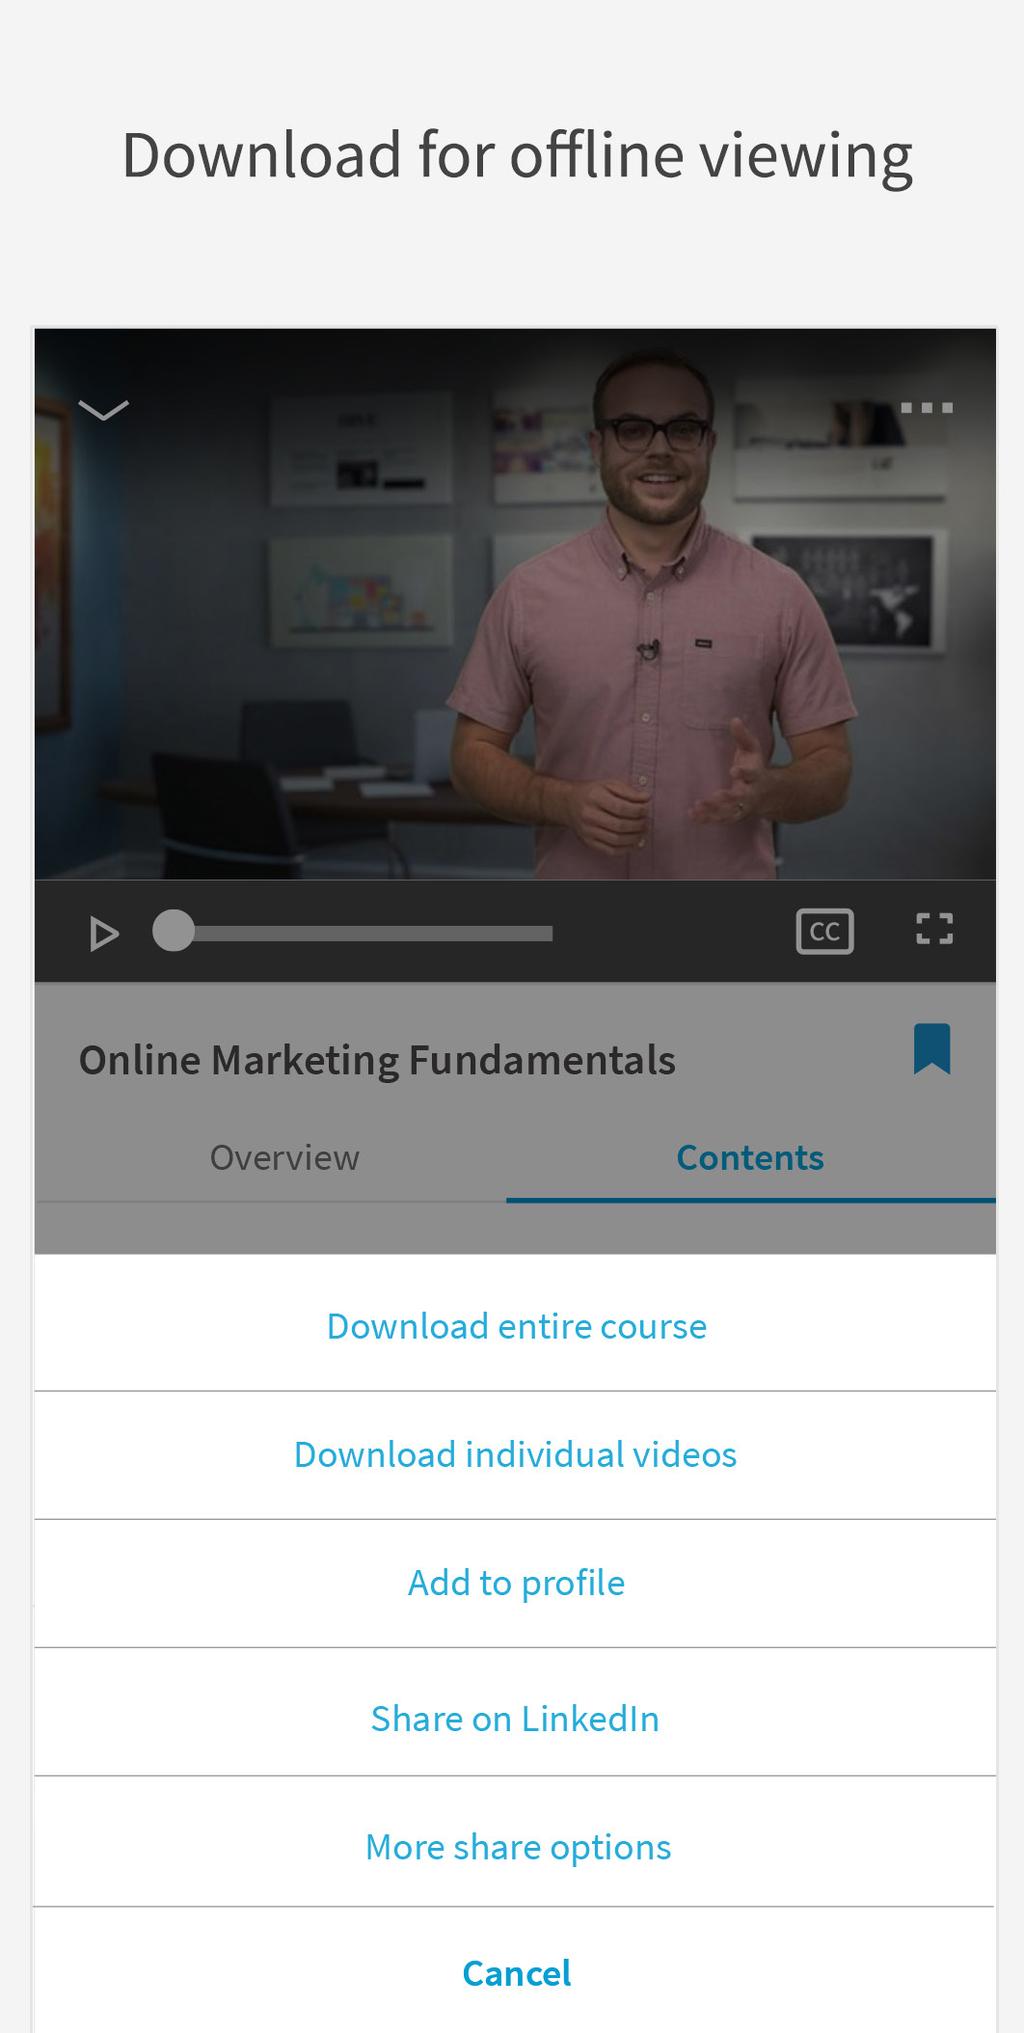 Explore courses and videos during your commute and save them for viewing later. Download a course for offline viewing.